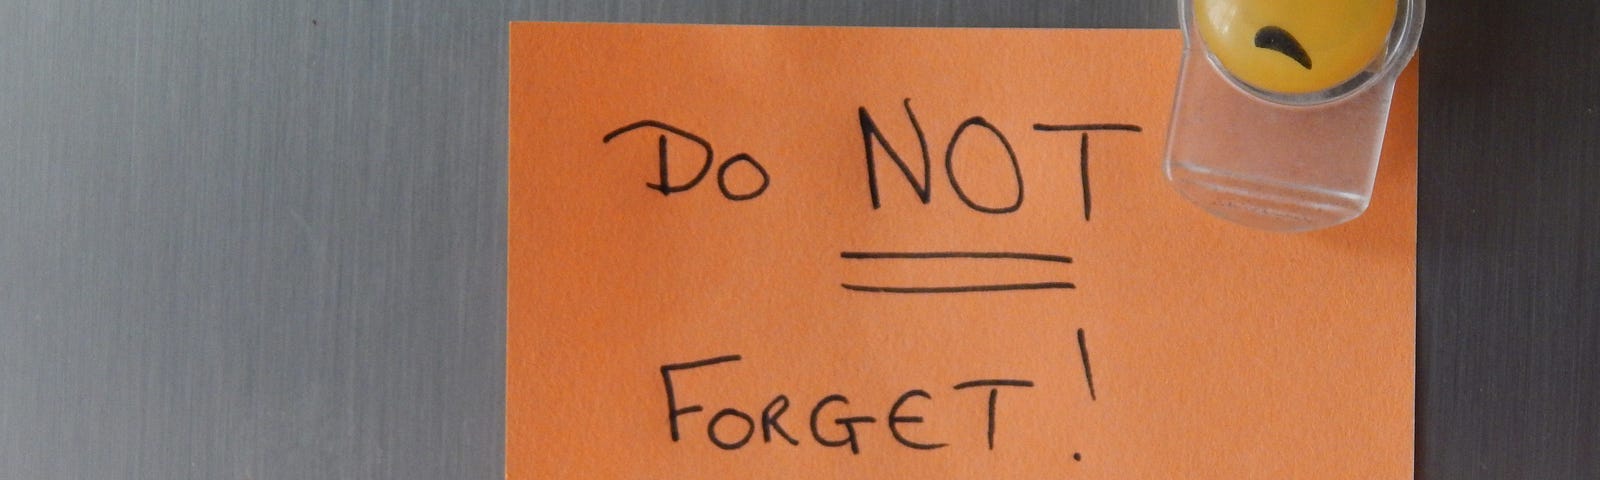 smiley face magnet on paper that says DO NOT FORGET